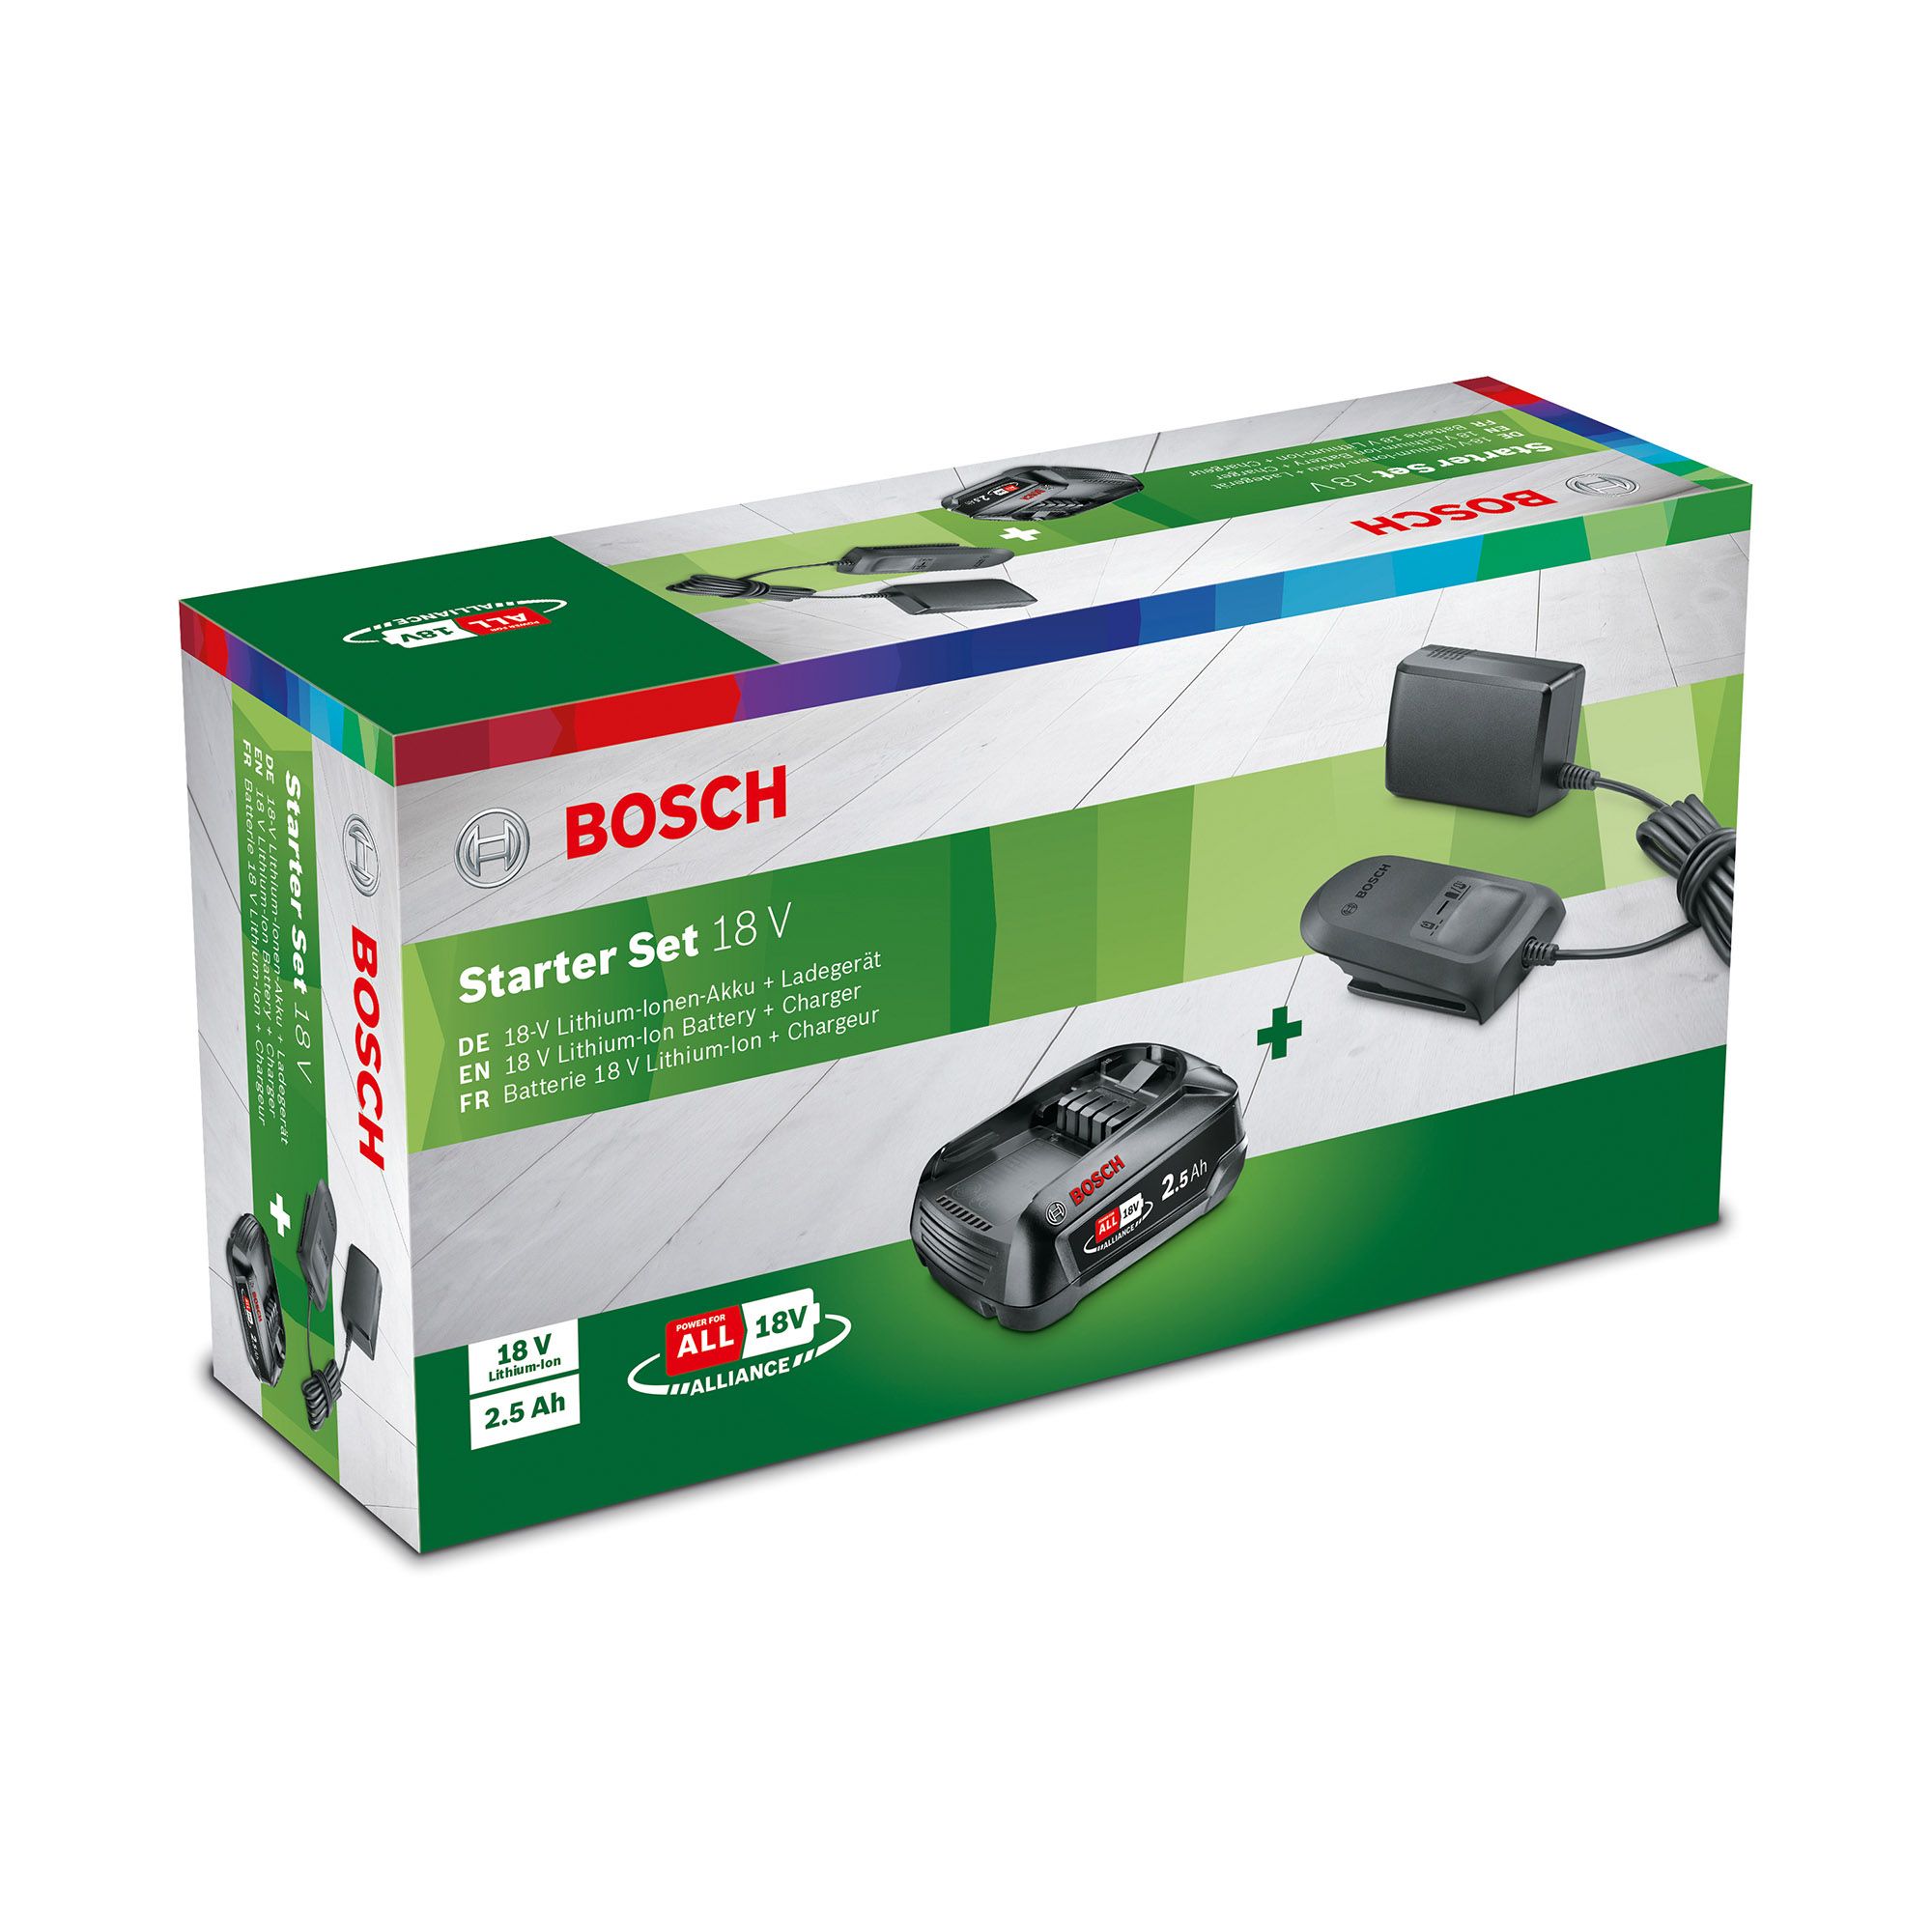 Bosch Power for all 18V 1 x 2.5 Battery charger with batteries